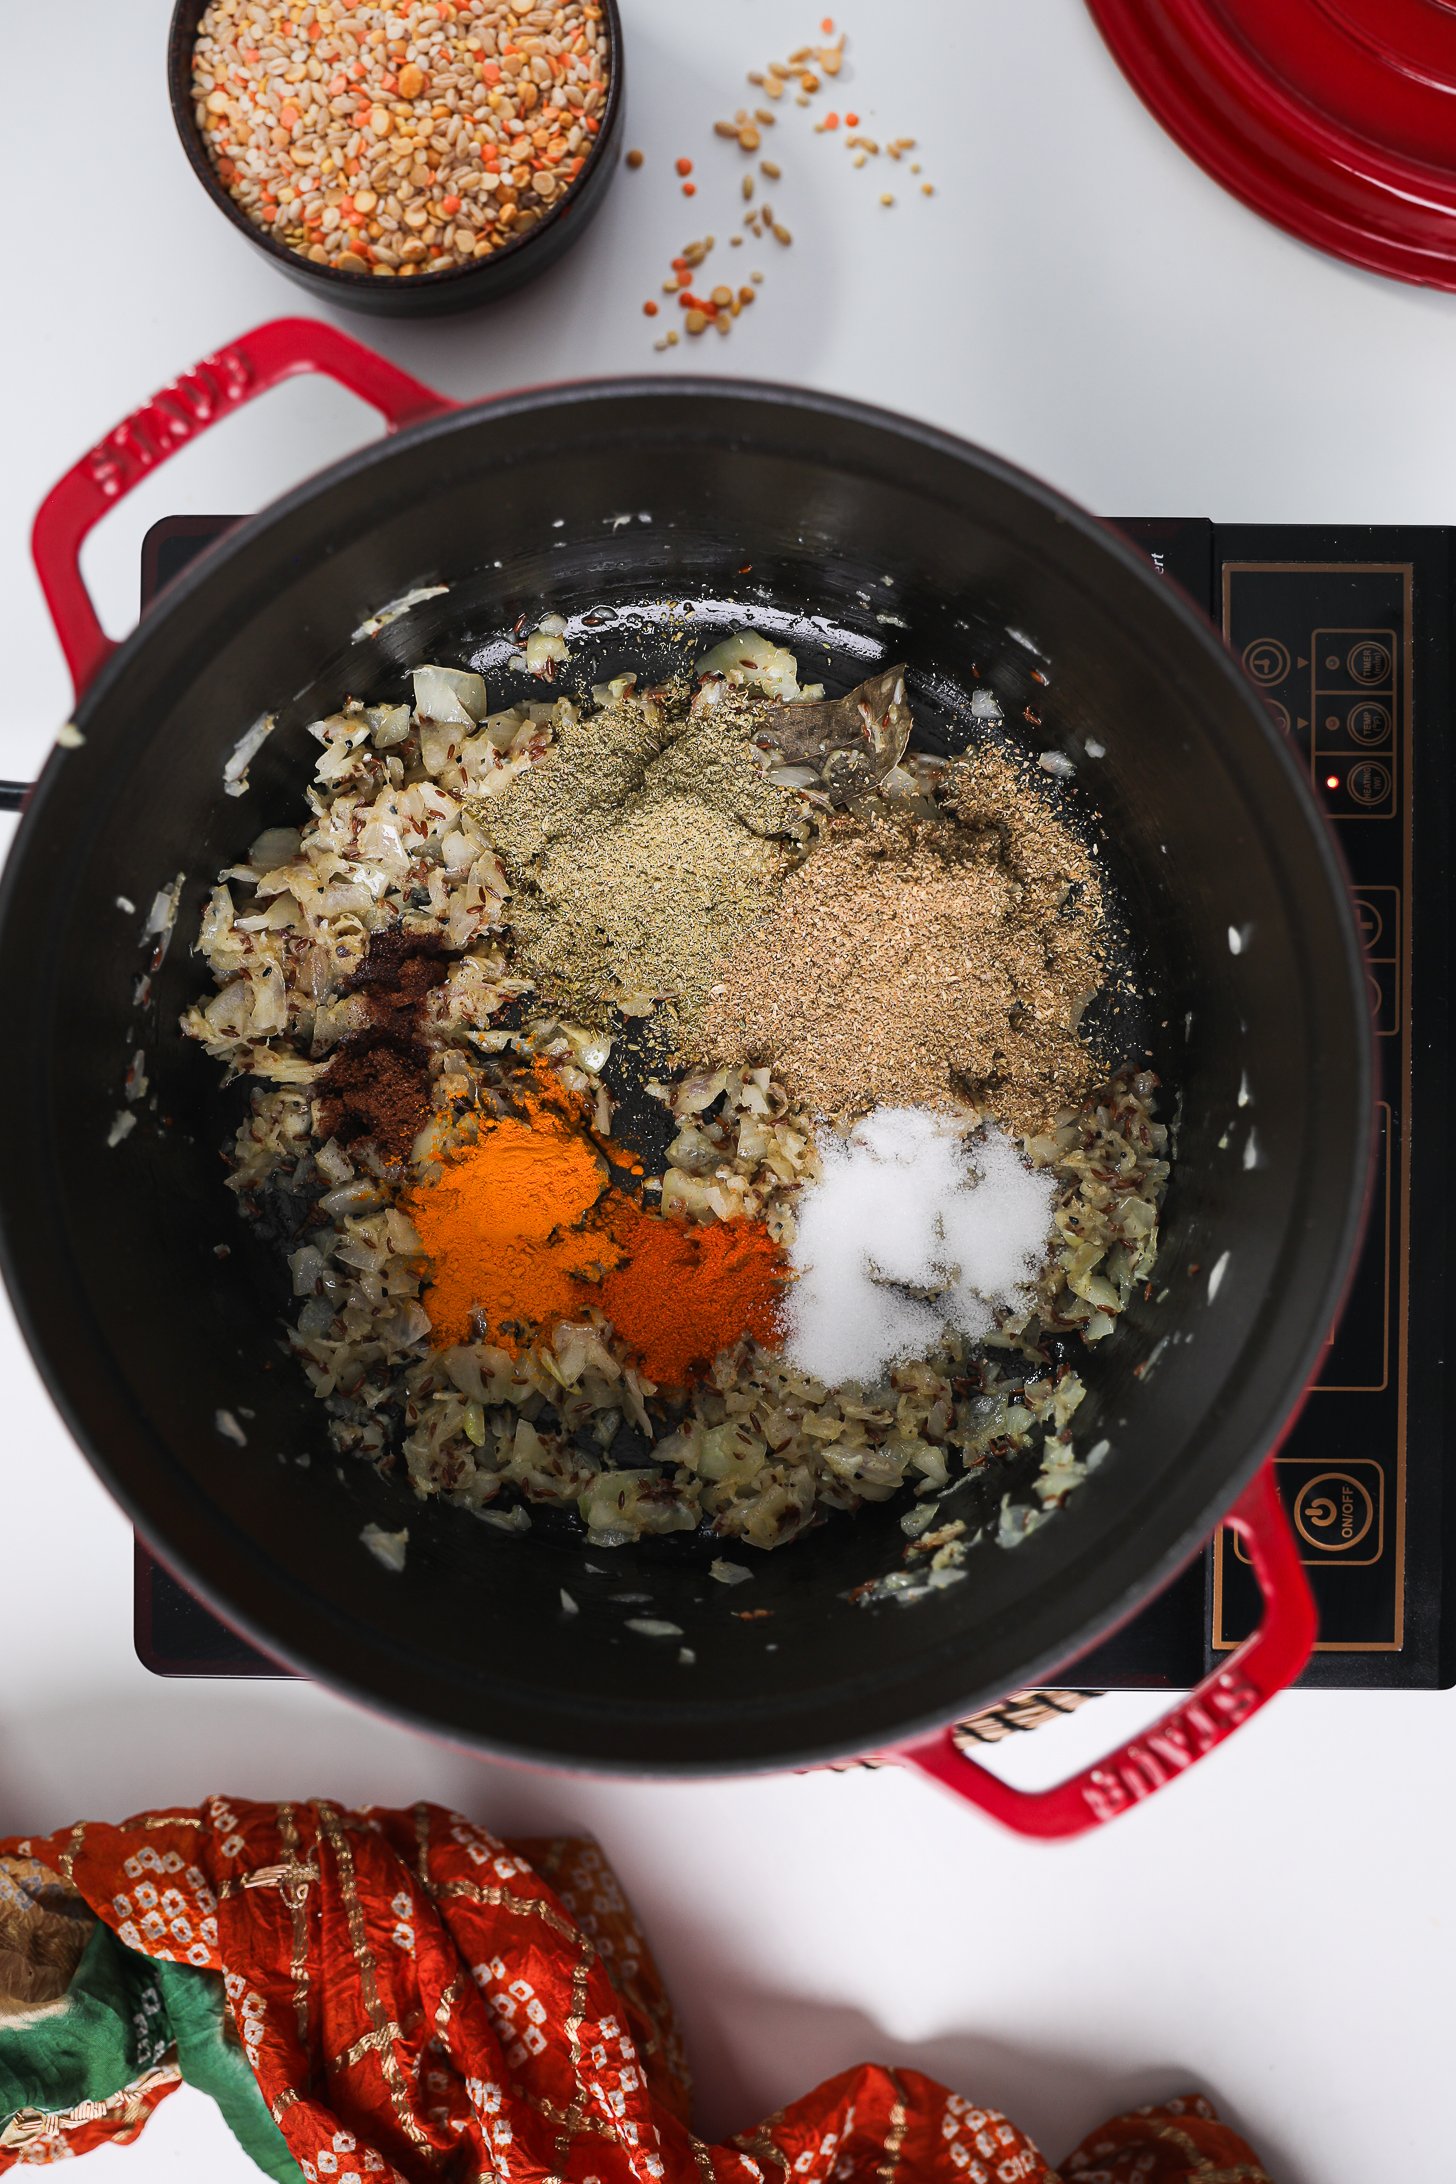 Indian powdered spices on top of fried onions and seeds in a cook pot on a mobile cooktop.